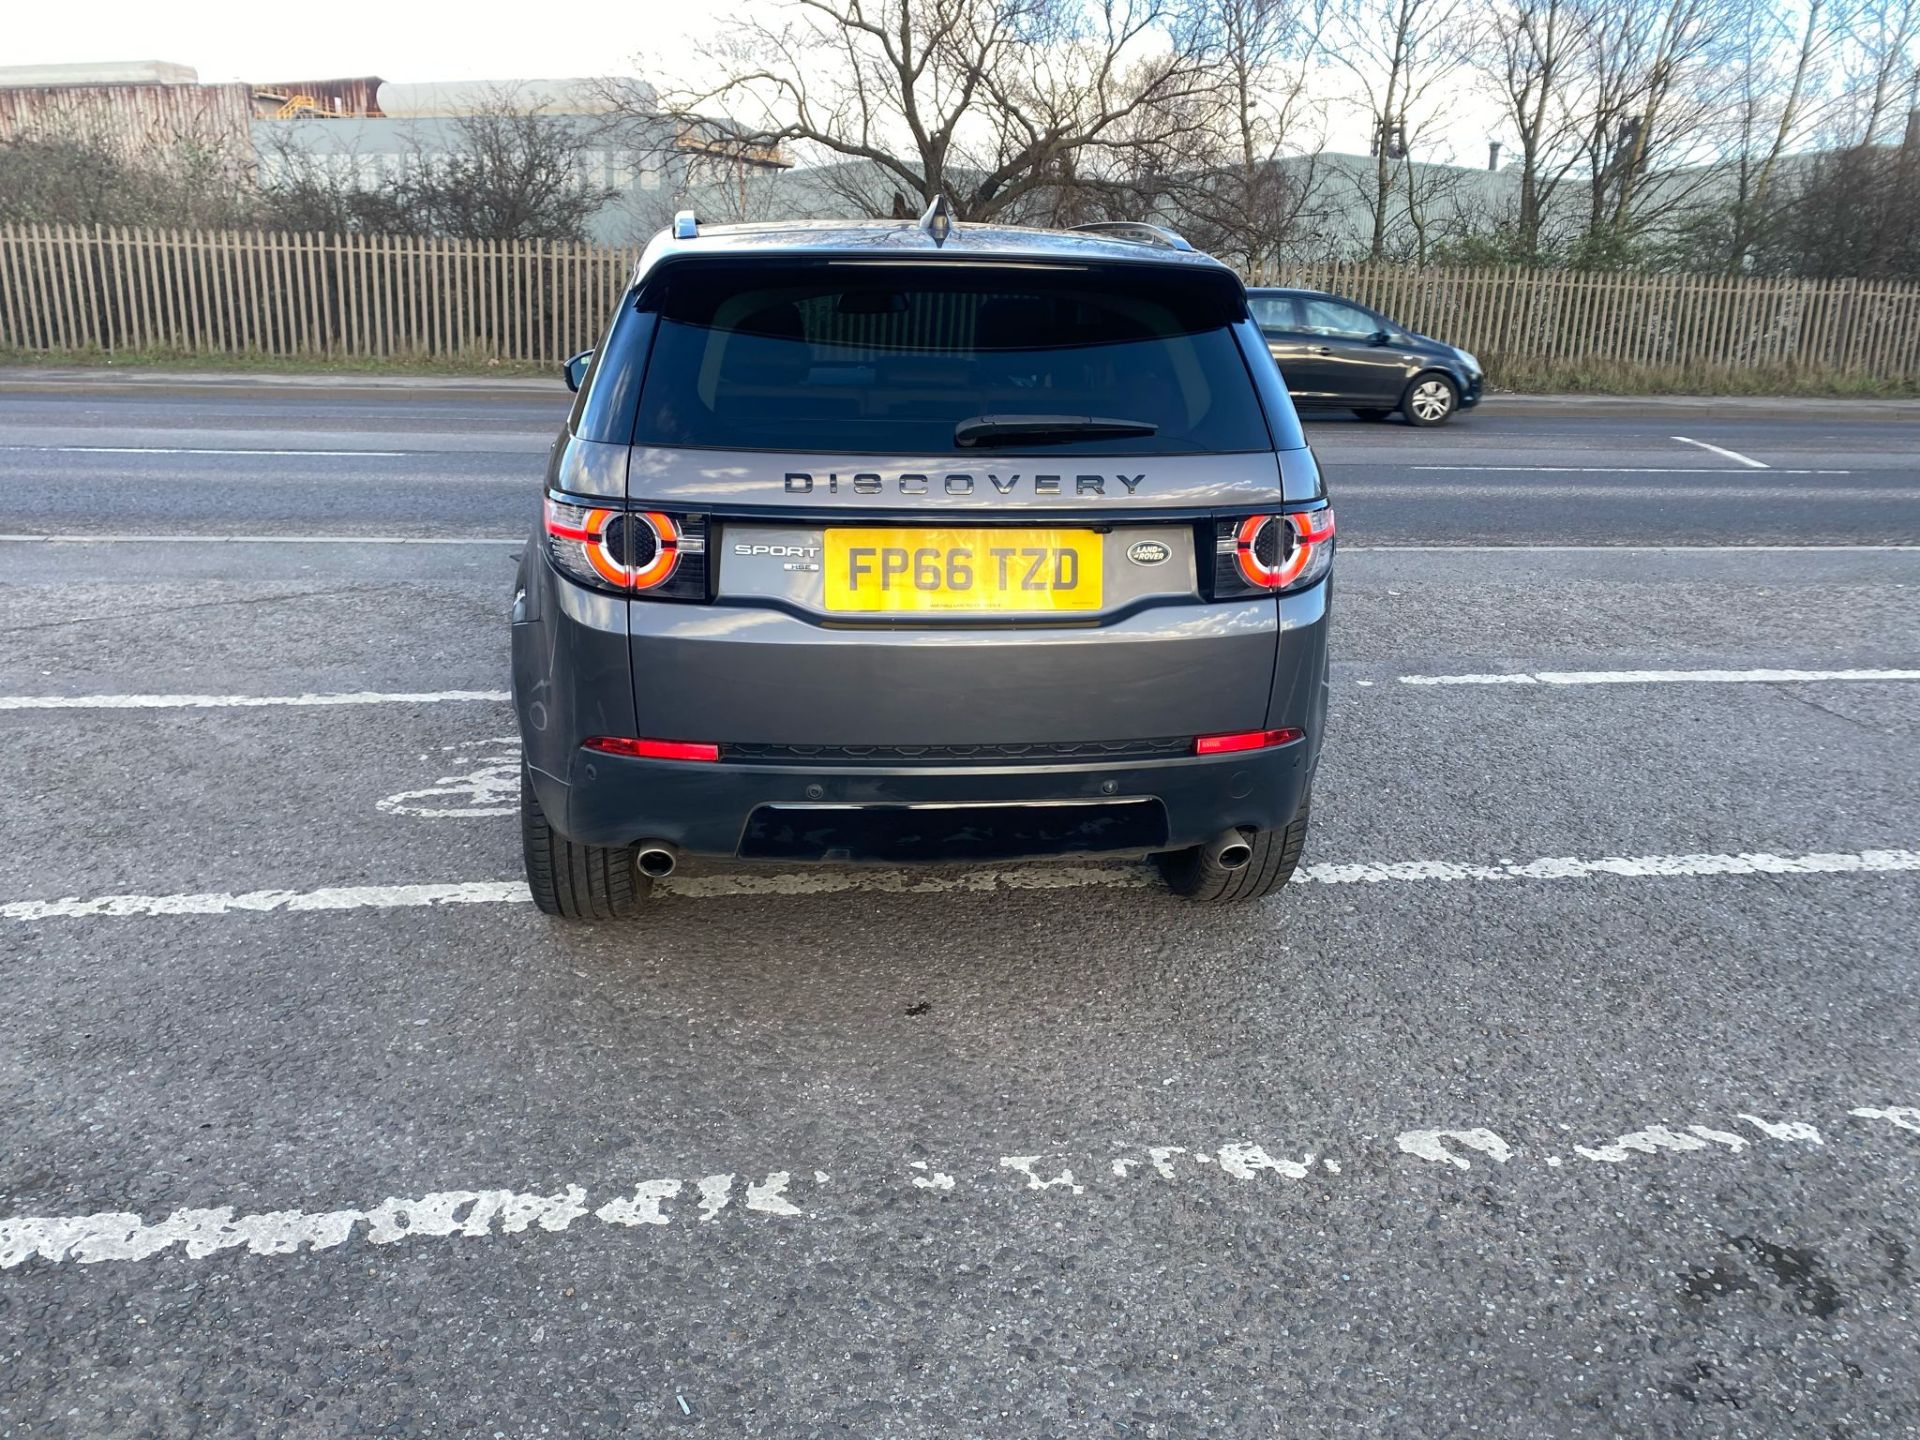 2016 66 LAND ROVER DISCOVERY SPORT HSE SUV ESTATE- 88K WITH LAND ROVER SERVICE HISTORY - PAN ROOF. - Image 7 of 19